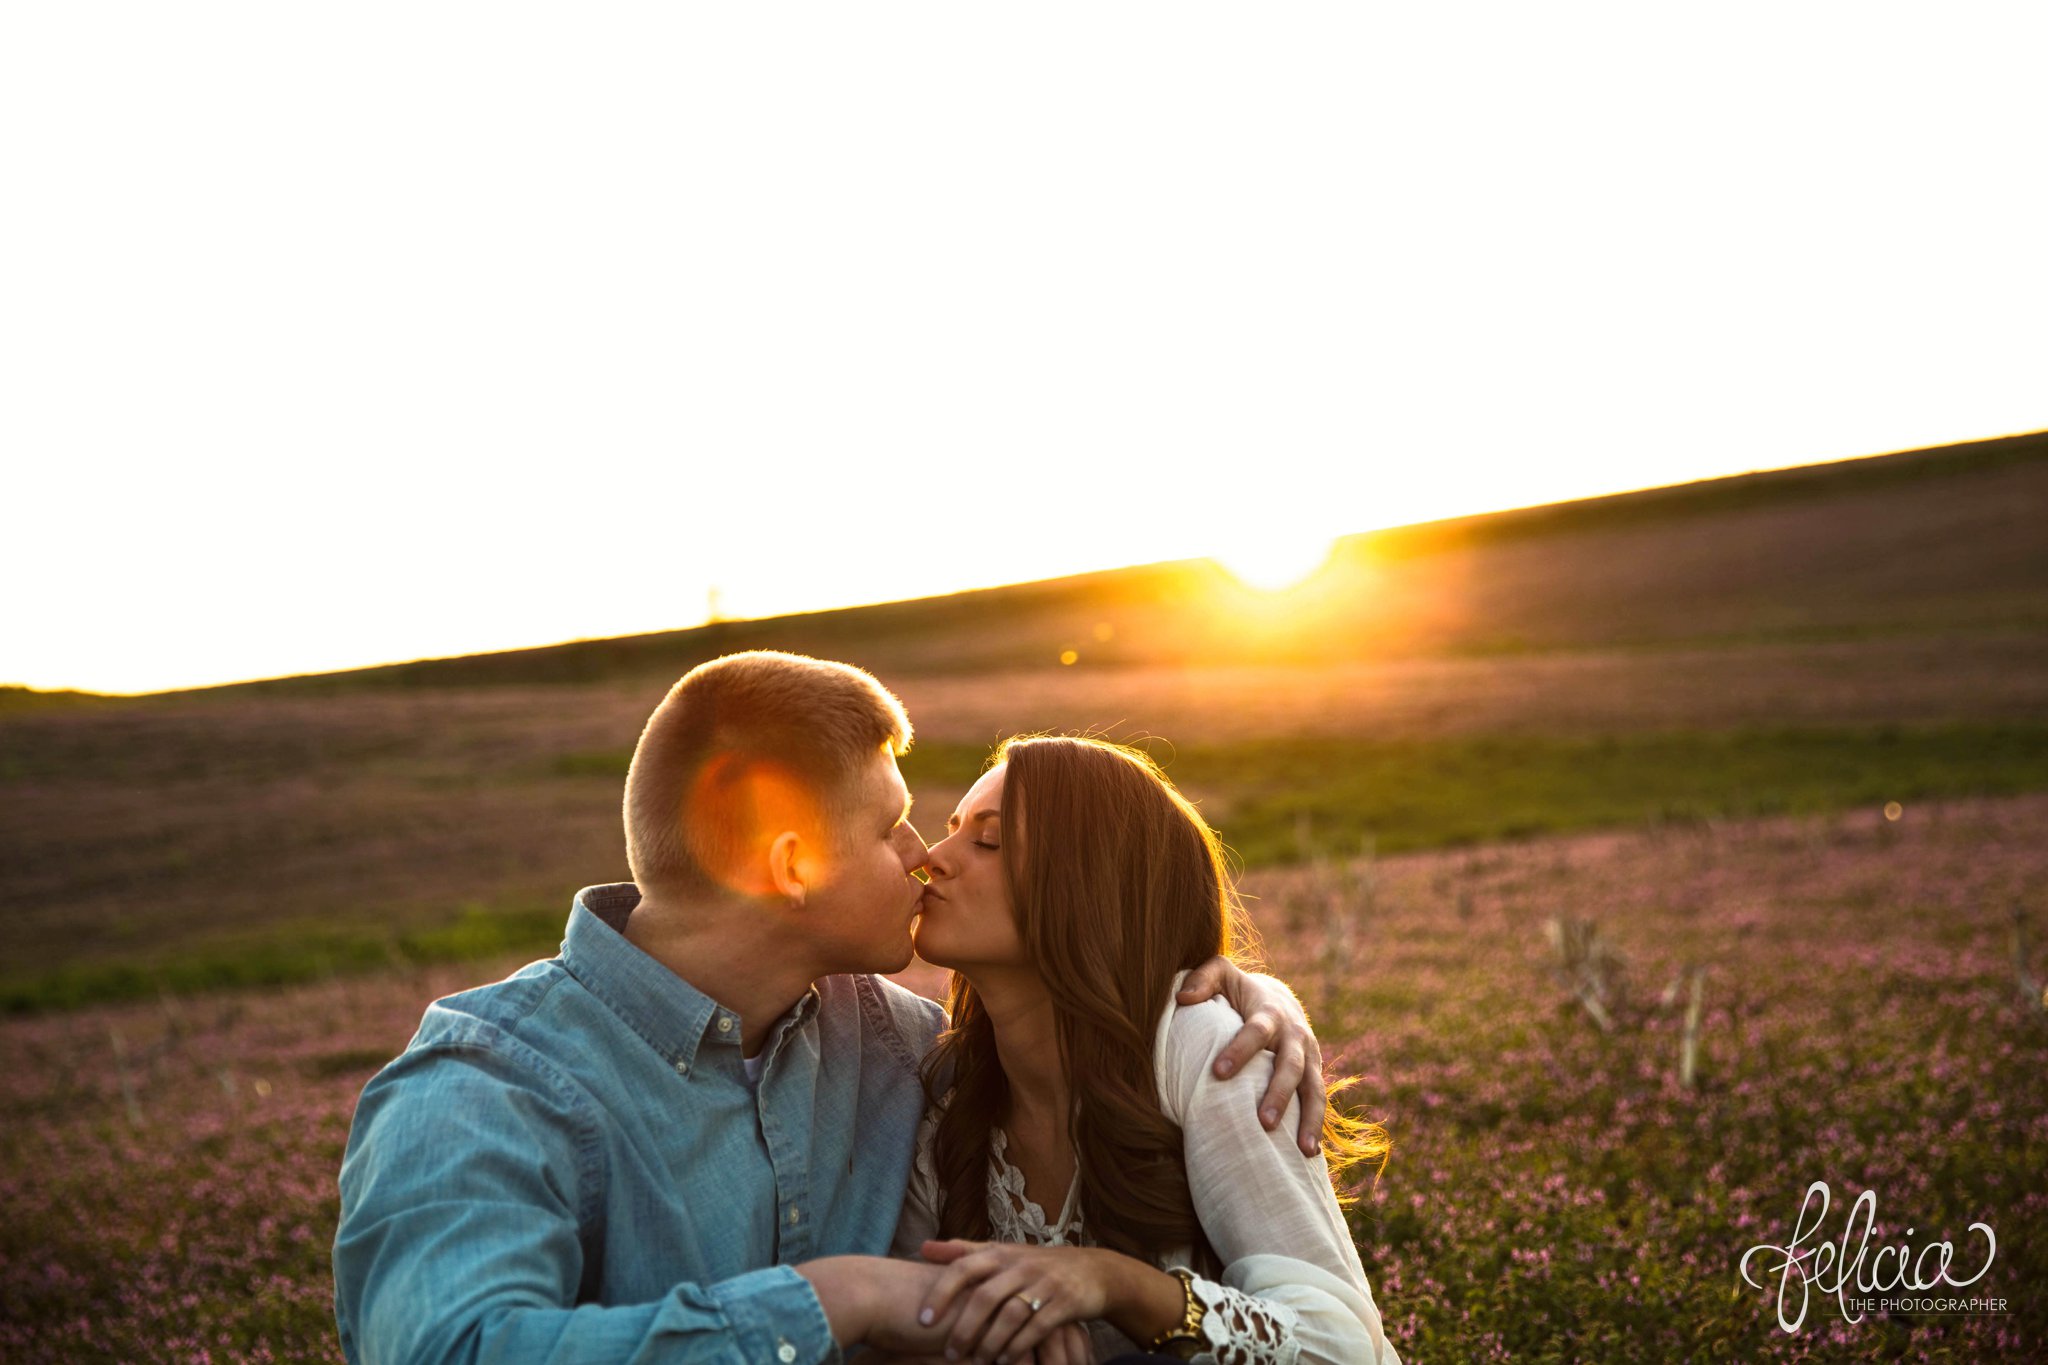 Romantic Engagement Photography | Kansas City, MO | Kissing in Field | Images by www.feliciathephotographer.com